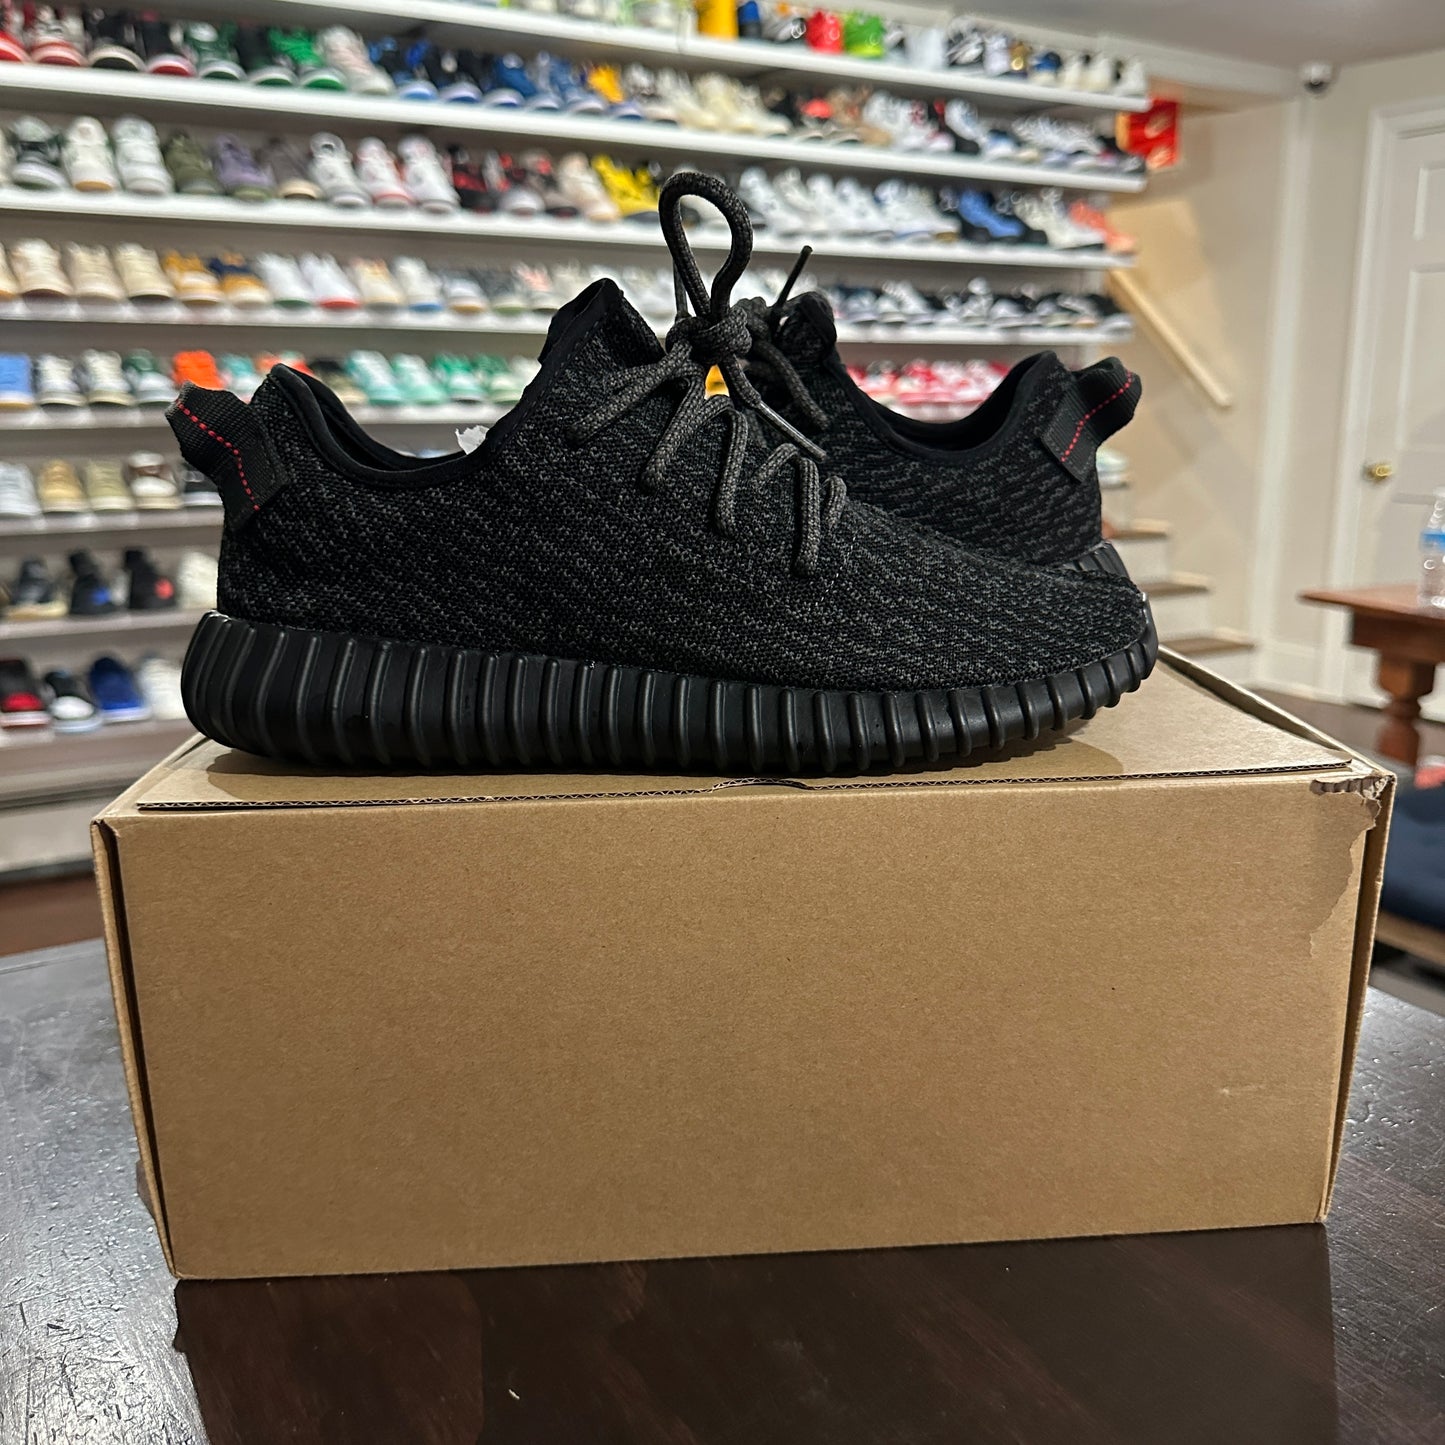 *USED* Yeezy Boost 350 v1 Pirate Black (2016) size 9 (VNDS)